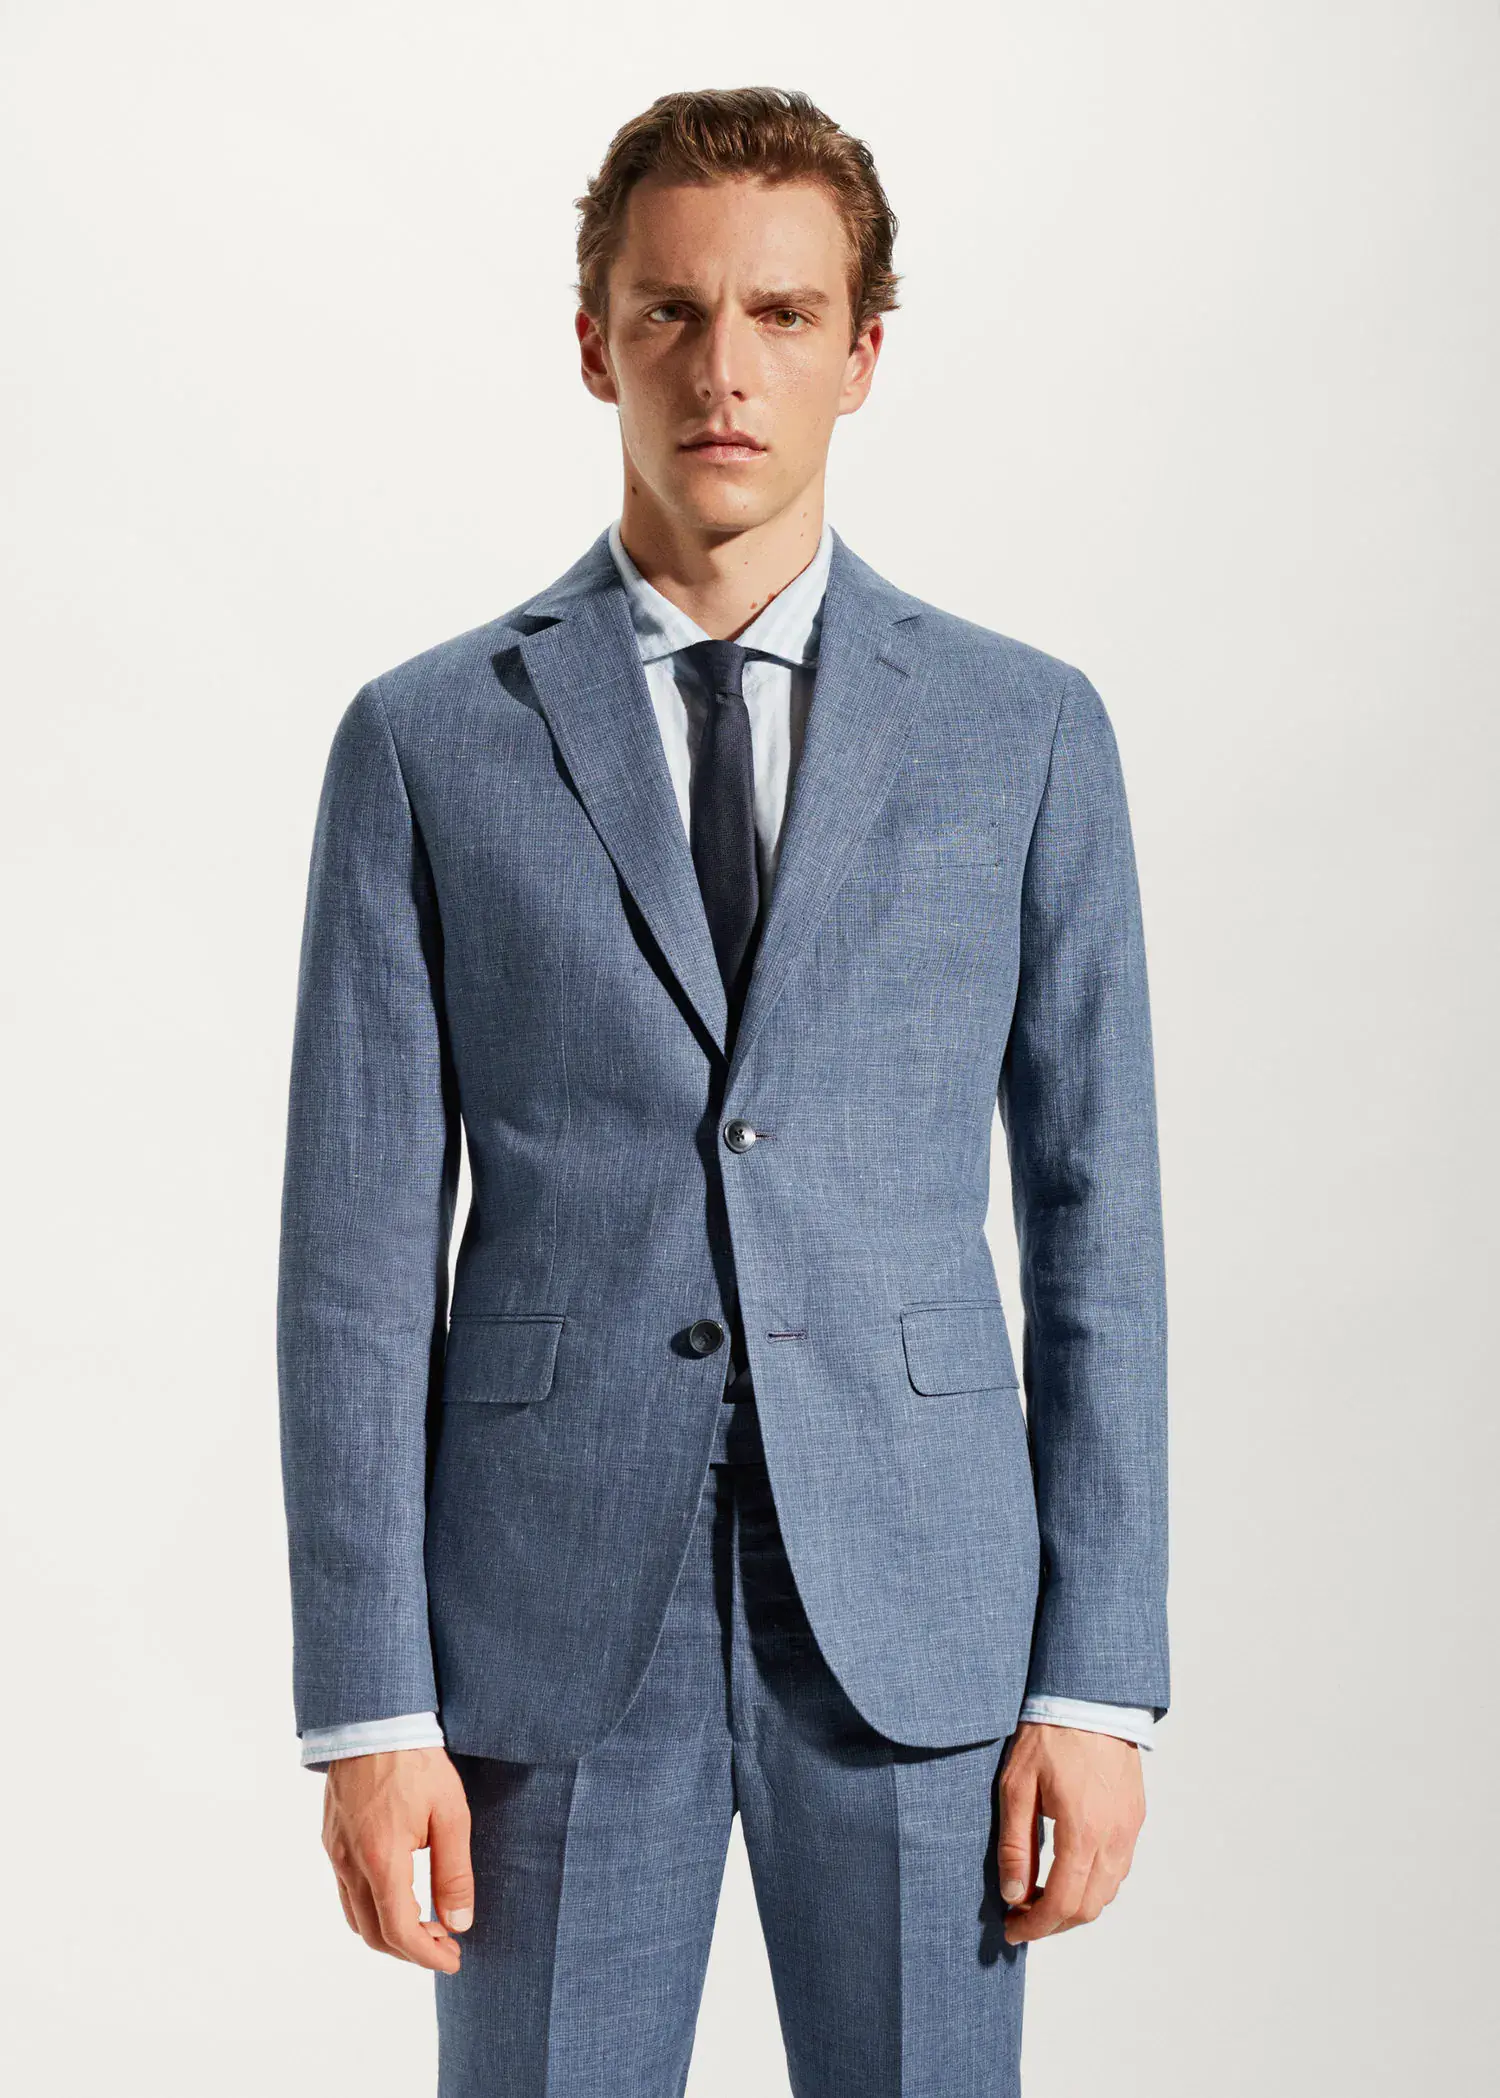 Mango Blazer suit 100% linen. a man wearing a suit and tie standing in front of a wall. 